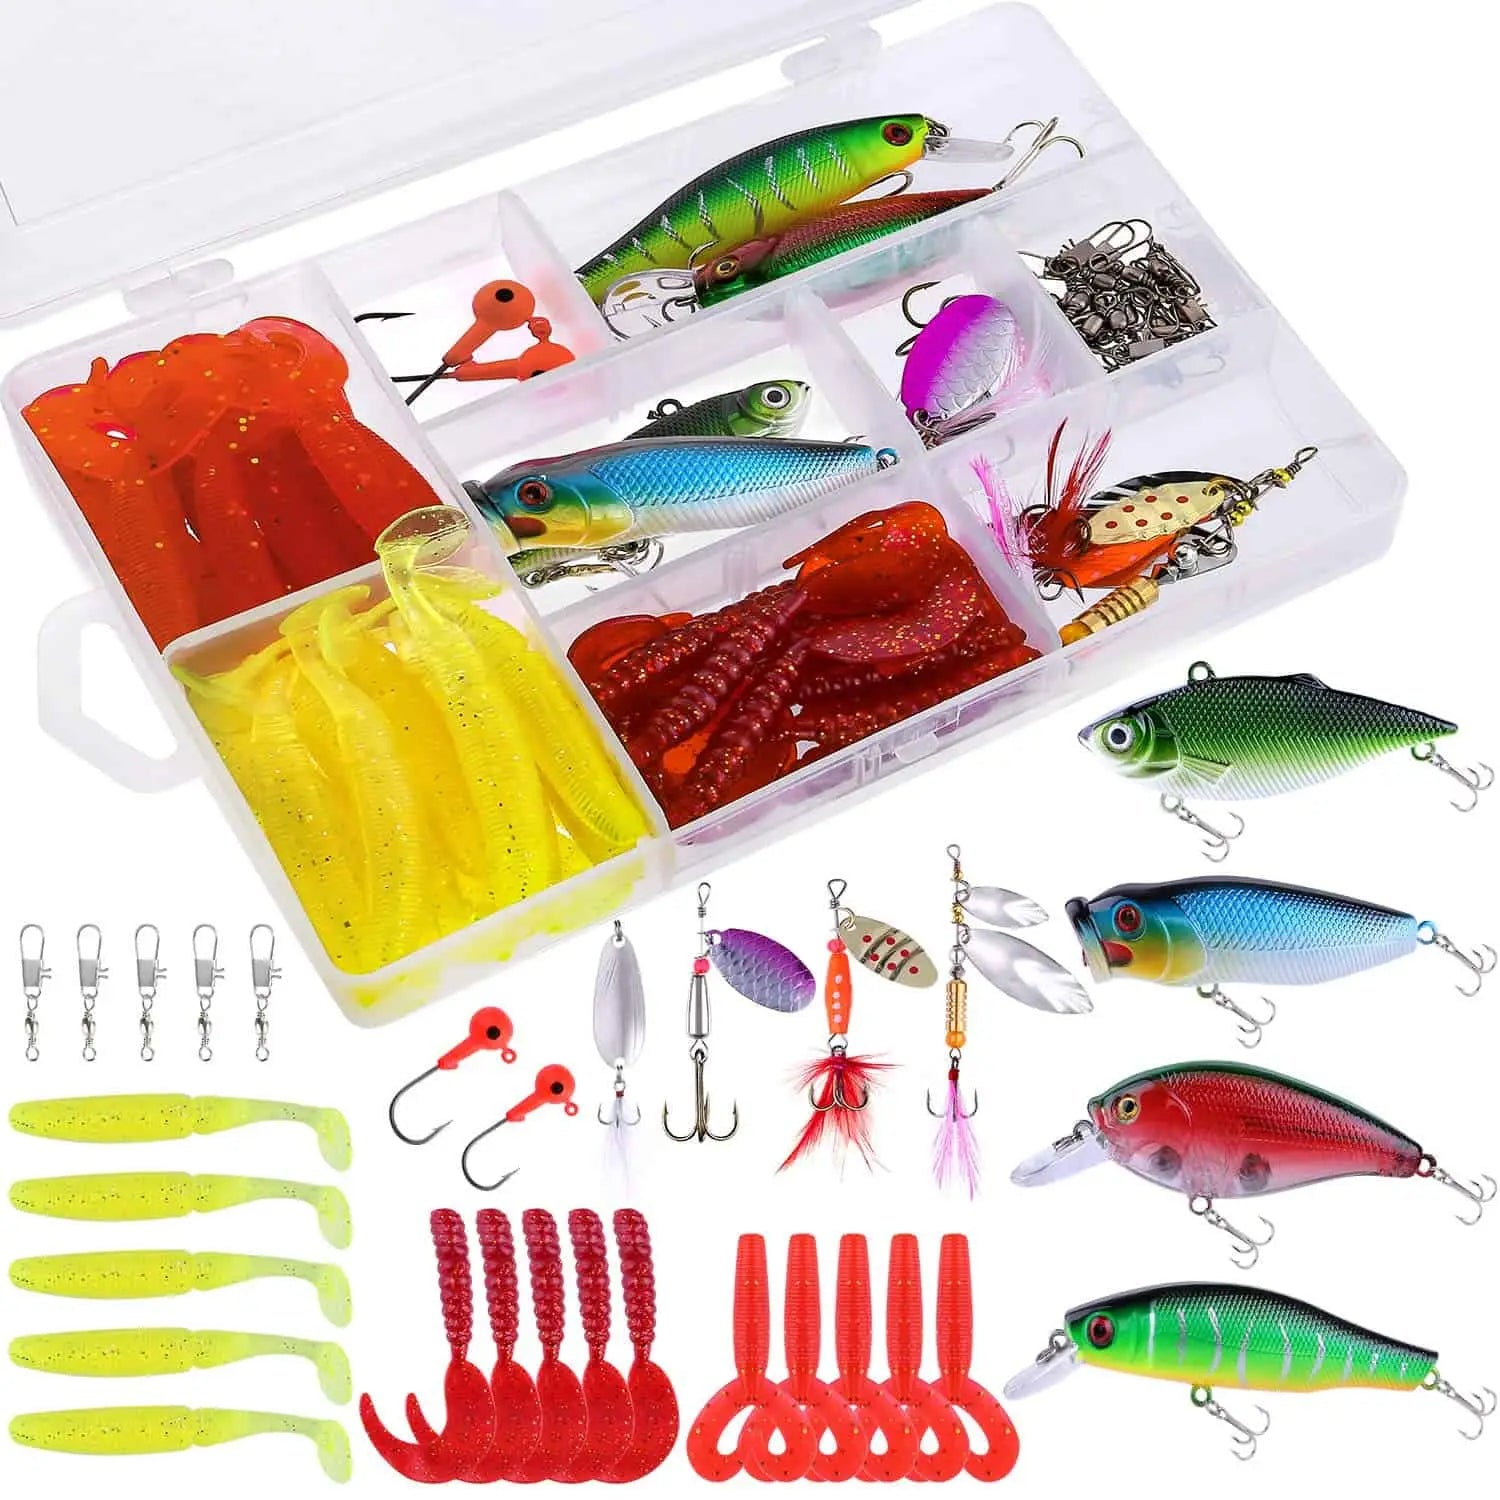 PLUSINNO Fishing Lures Baits Tackle Including Nepal